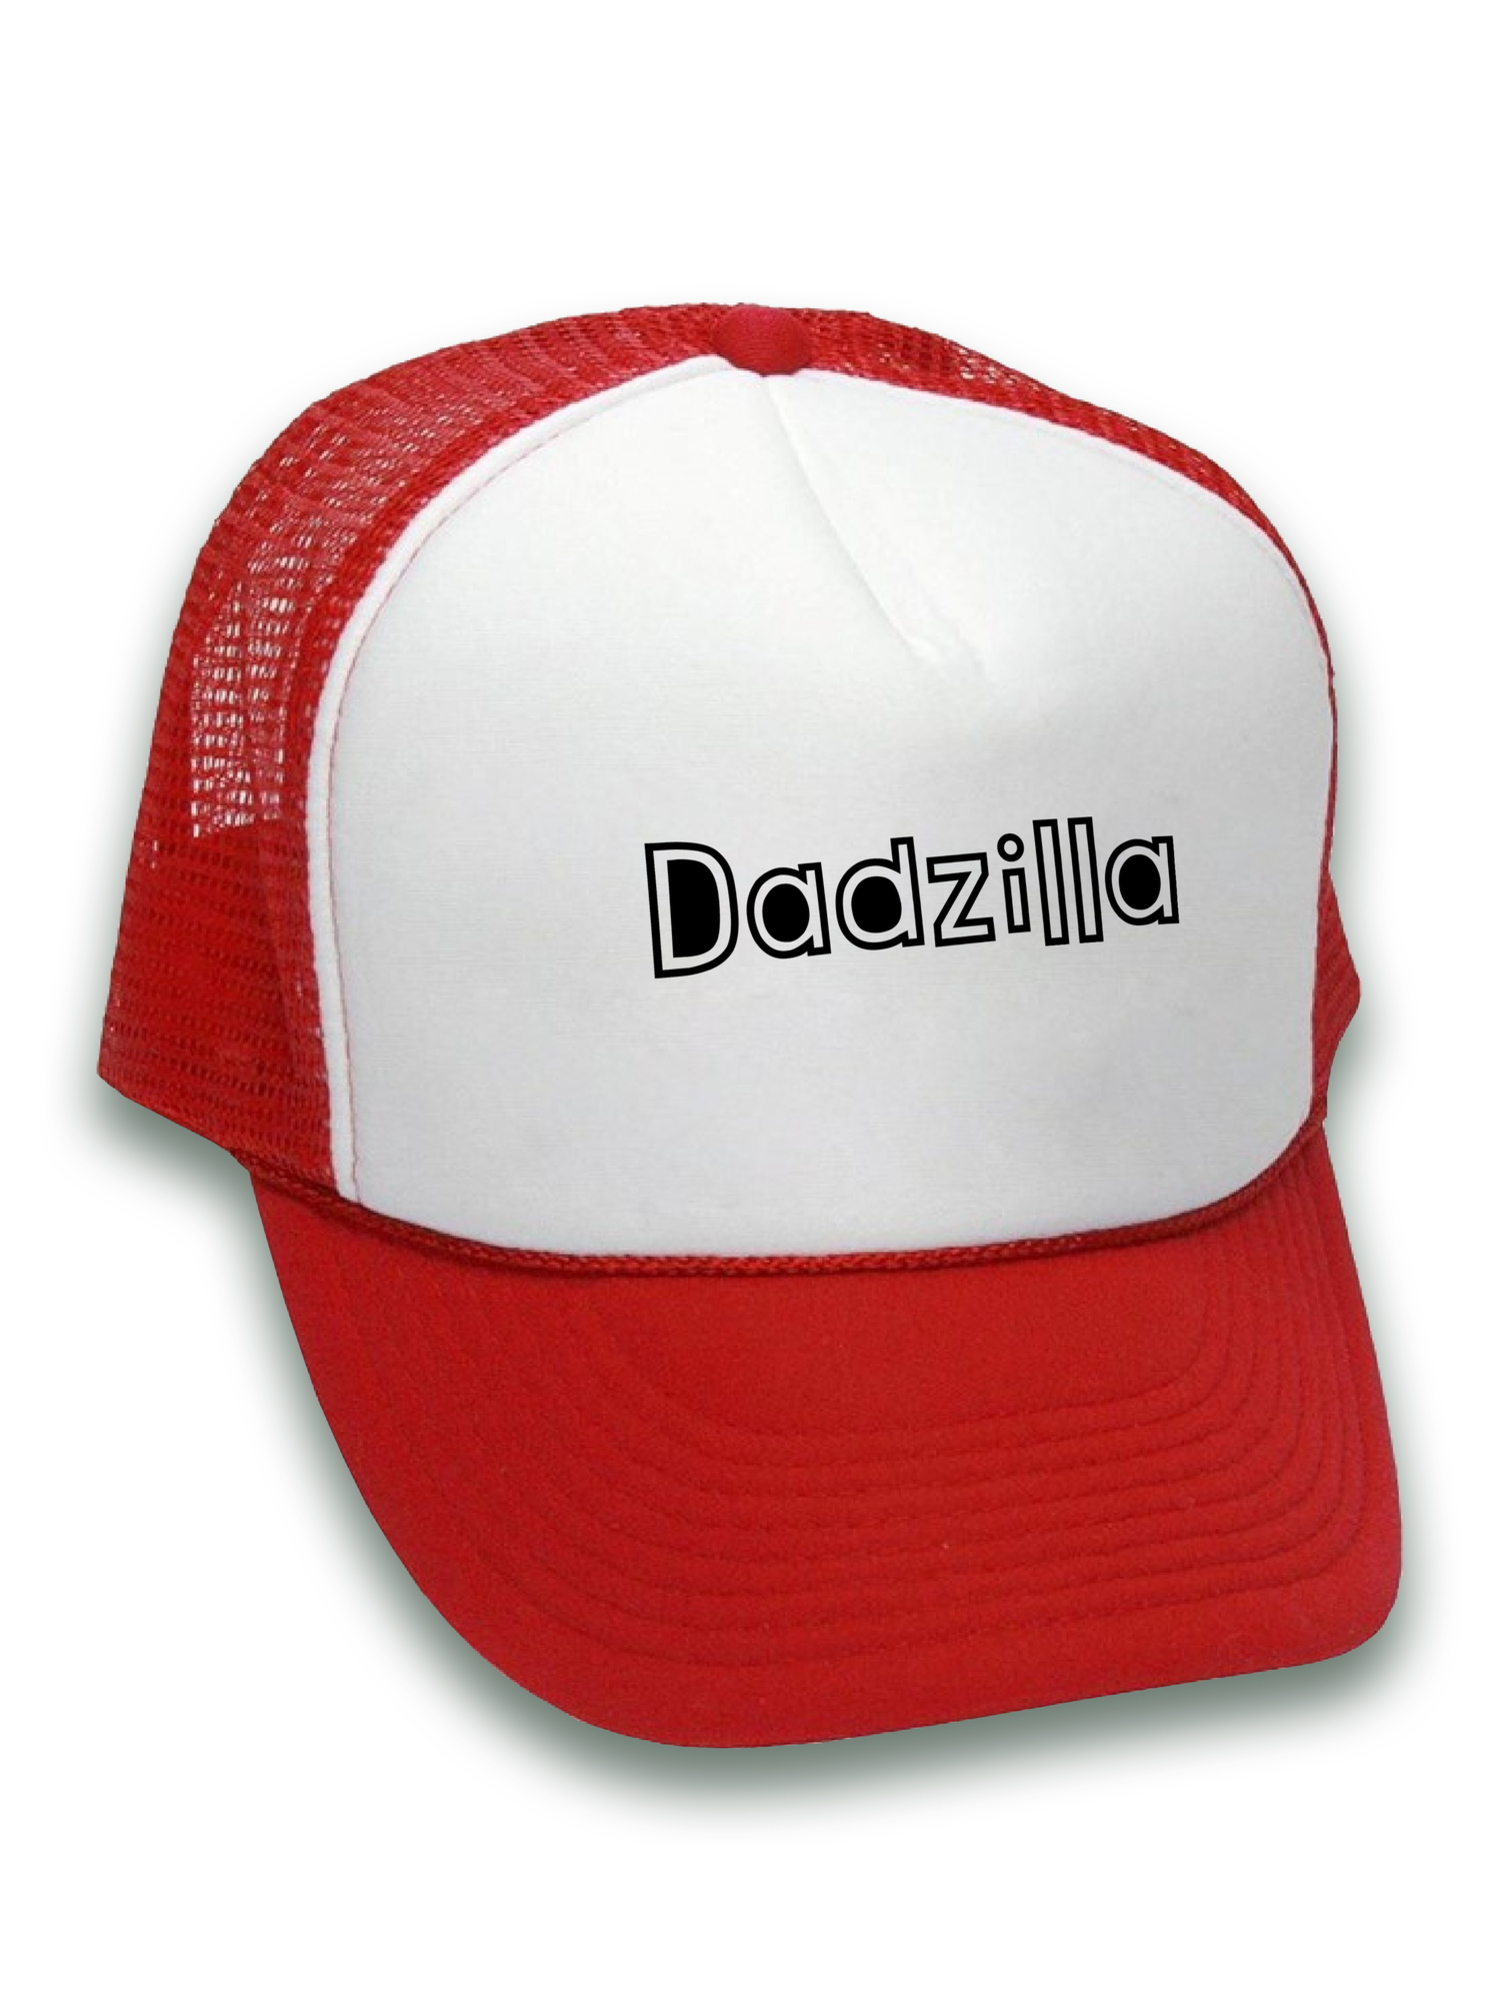 Awkward Styles Dadzilla Trucker Hat Funny Dad Hats With Sayings Father's Day Gifts for Men Dad 2018 Hat Boss Dad Snapback Hat Father's Day Trucker Hats for Men Dad Accessories Daddy Cap Gifts for Dad - image 2 of 6